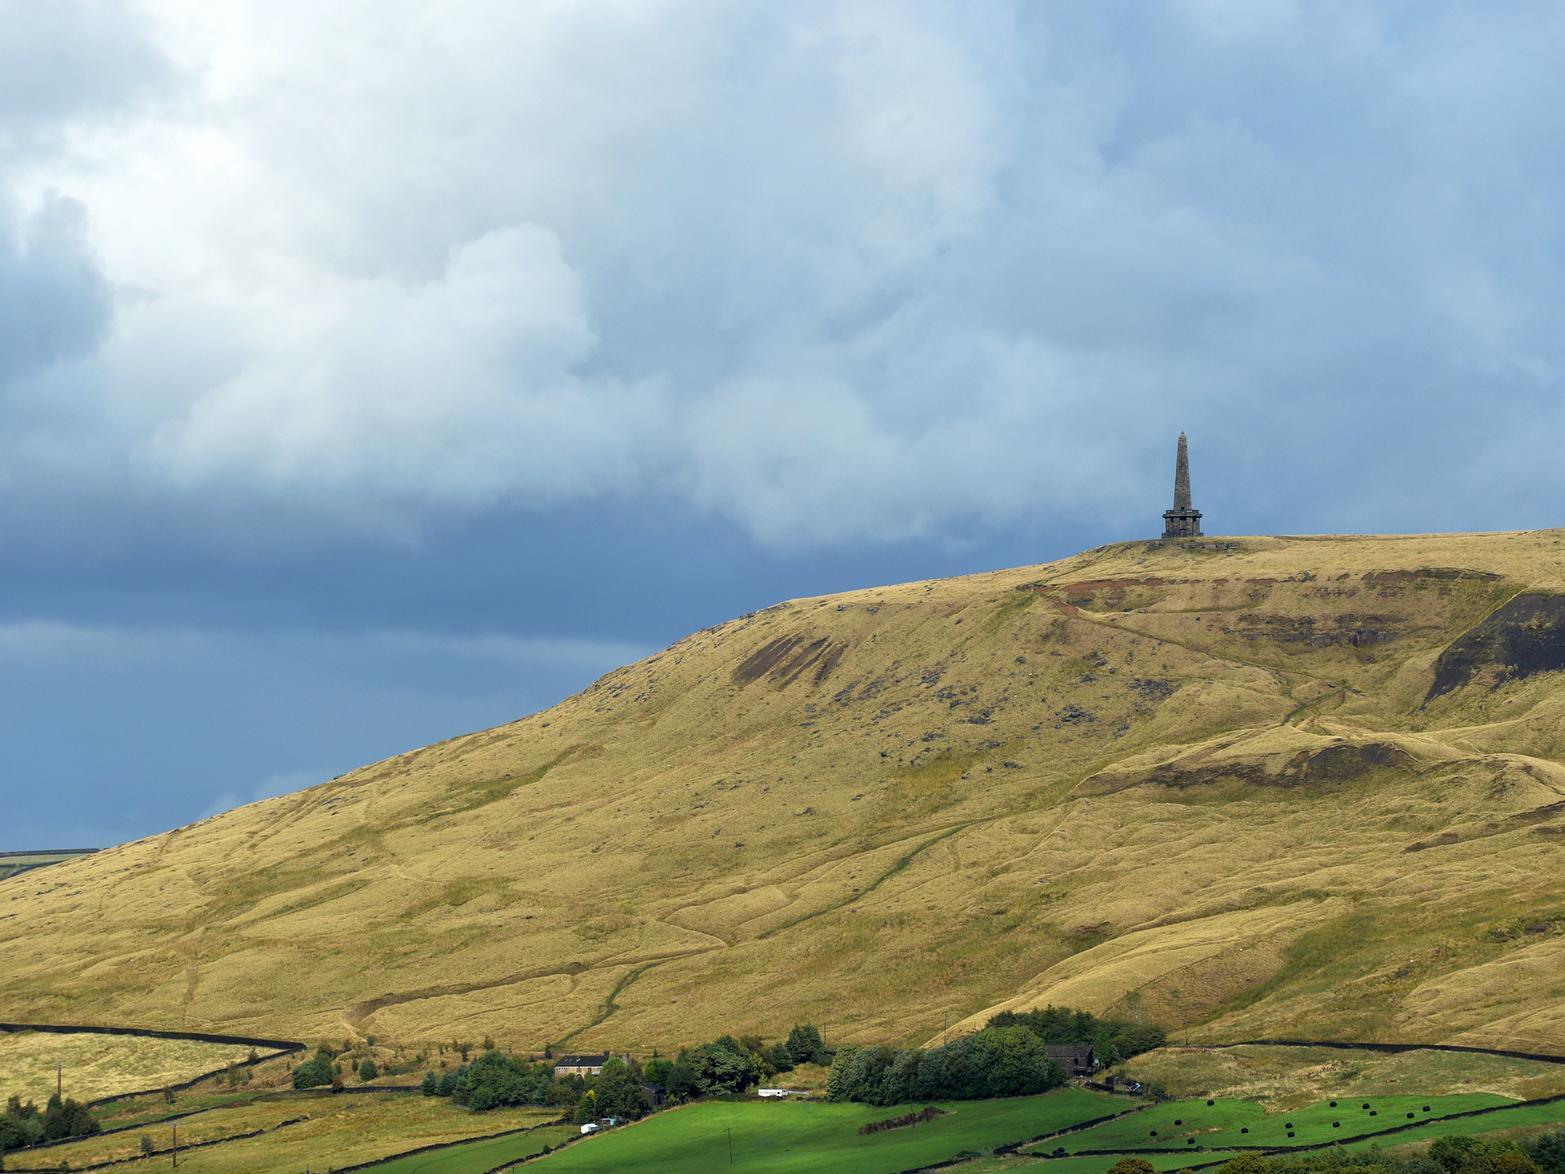 Standing high above the Calder Valley, Stoodley Pike is popular with walkers. Take in the scenic views on one of the many walks up the 400m hill to the Monument at its summit. The Monument was designed in 1854 by local architect James Green.